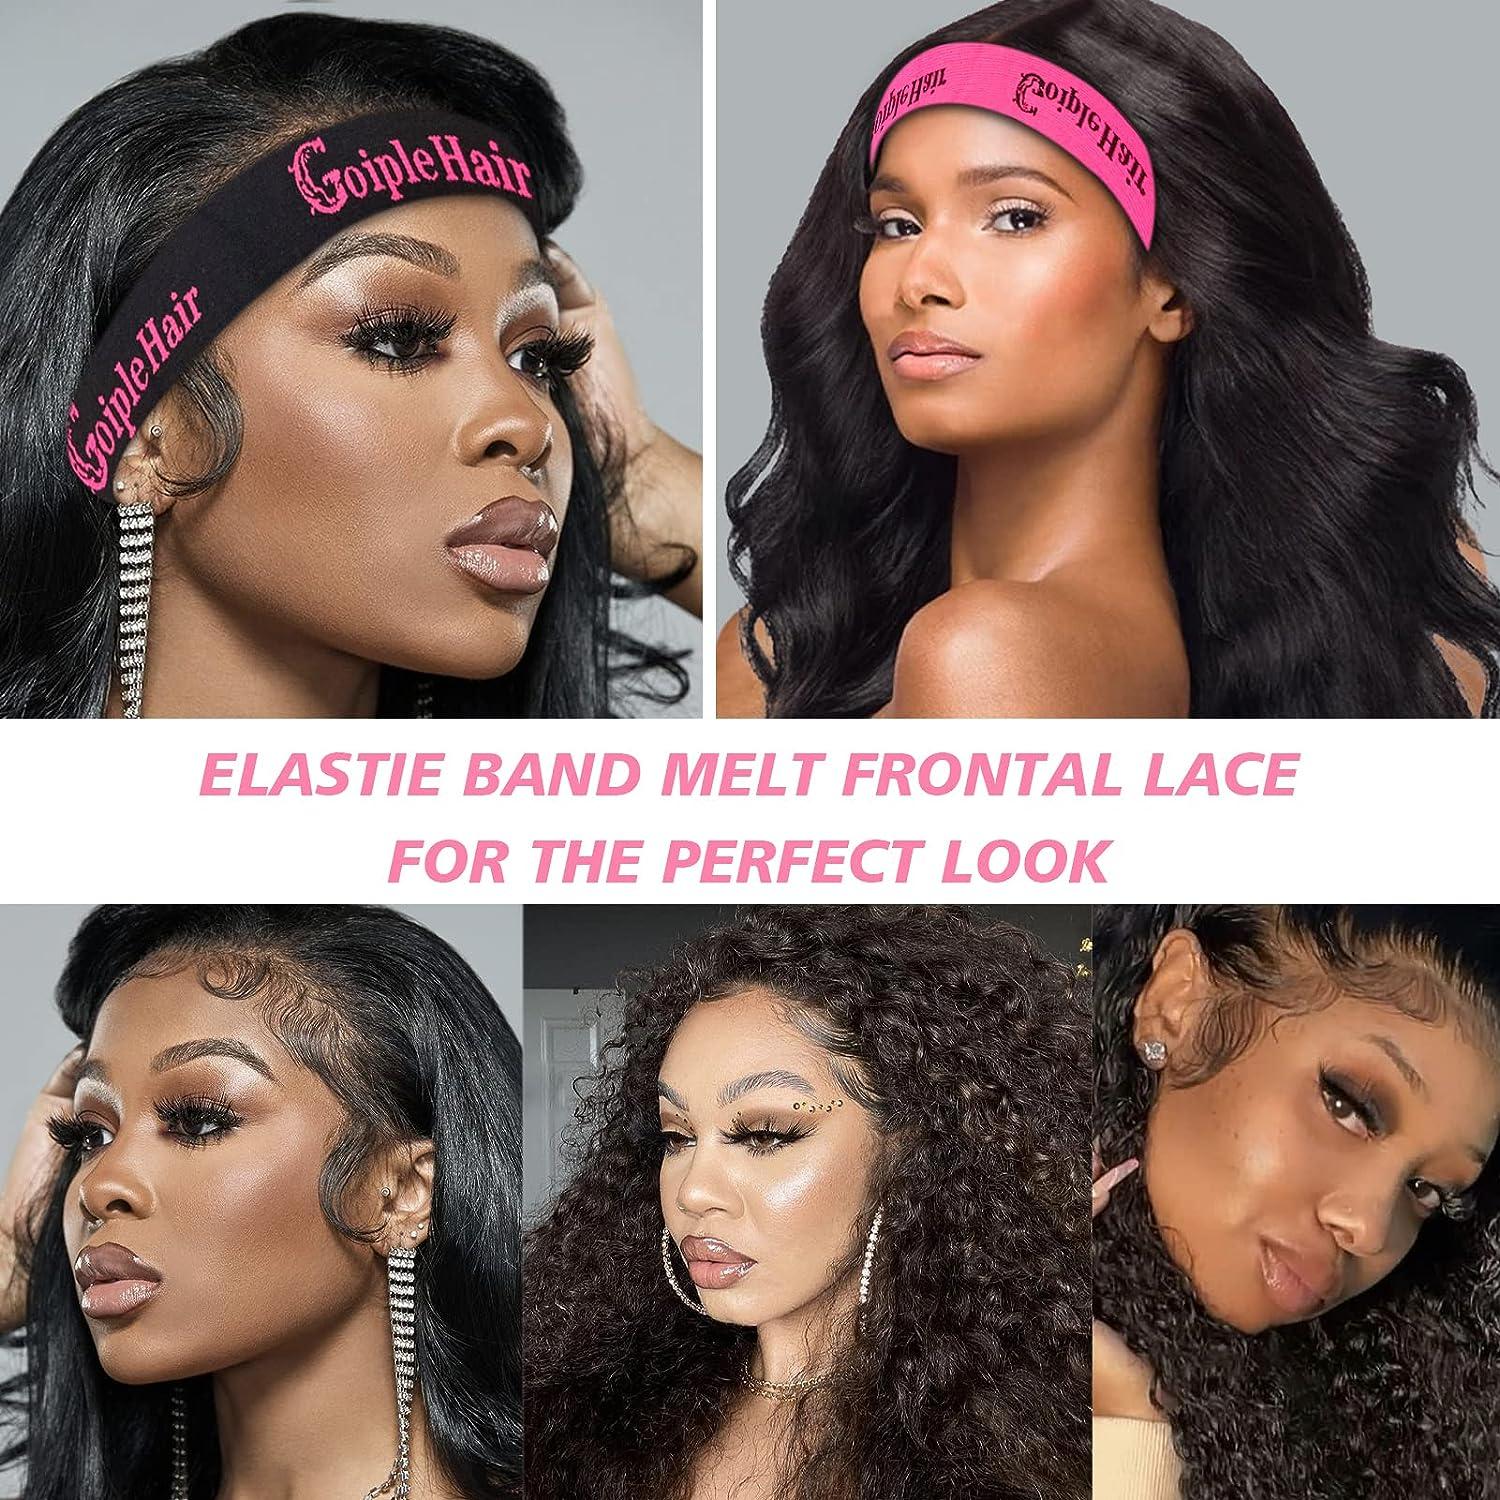 1pc Elastic Bands for Wig, Edge Wrap to Lay Edges, Lace Melting Bands, Wig Bands for Edges, Lace Frontal Melt, 23.6 inch x 1 inch, Size: 23.6 x 1